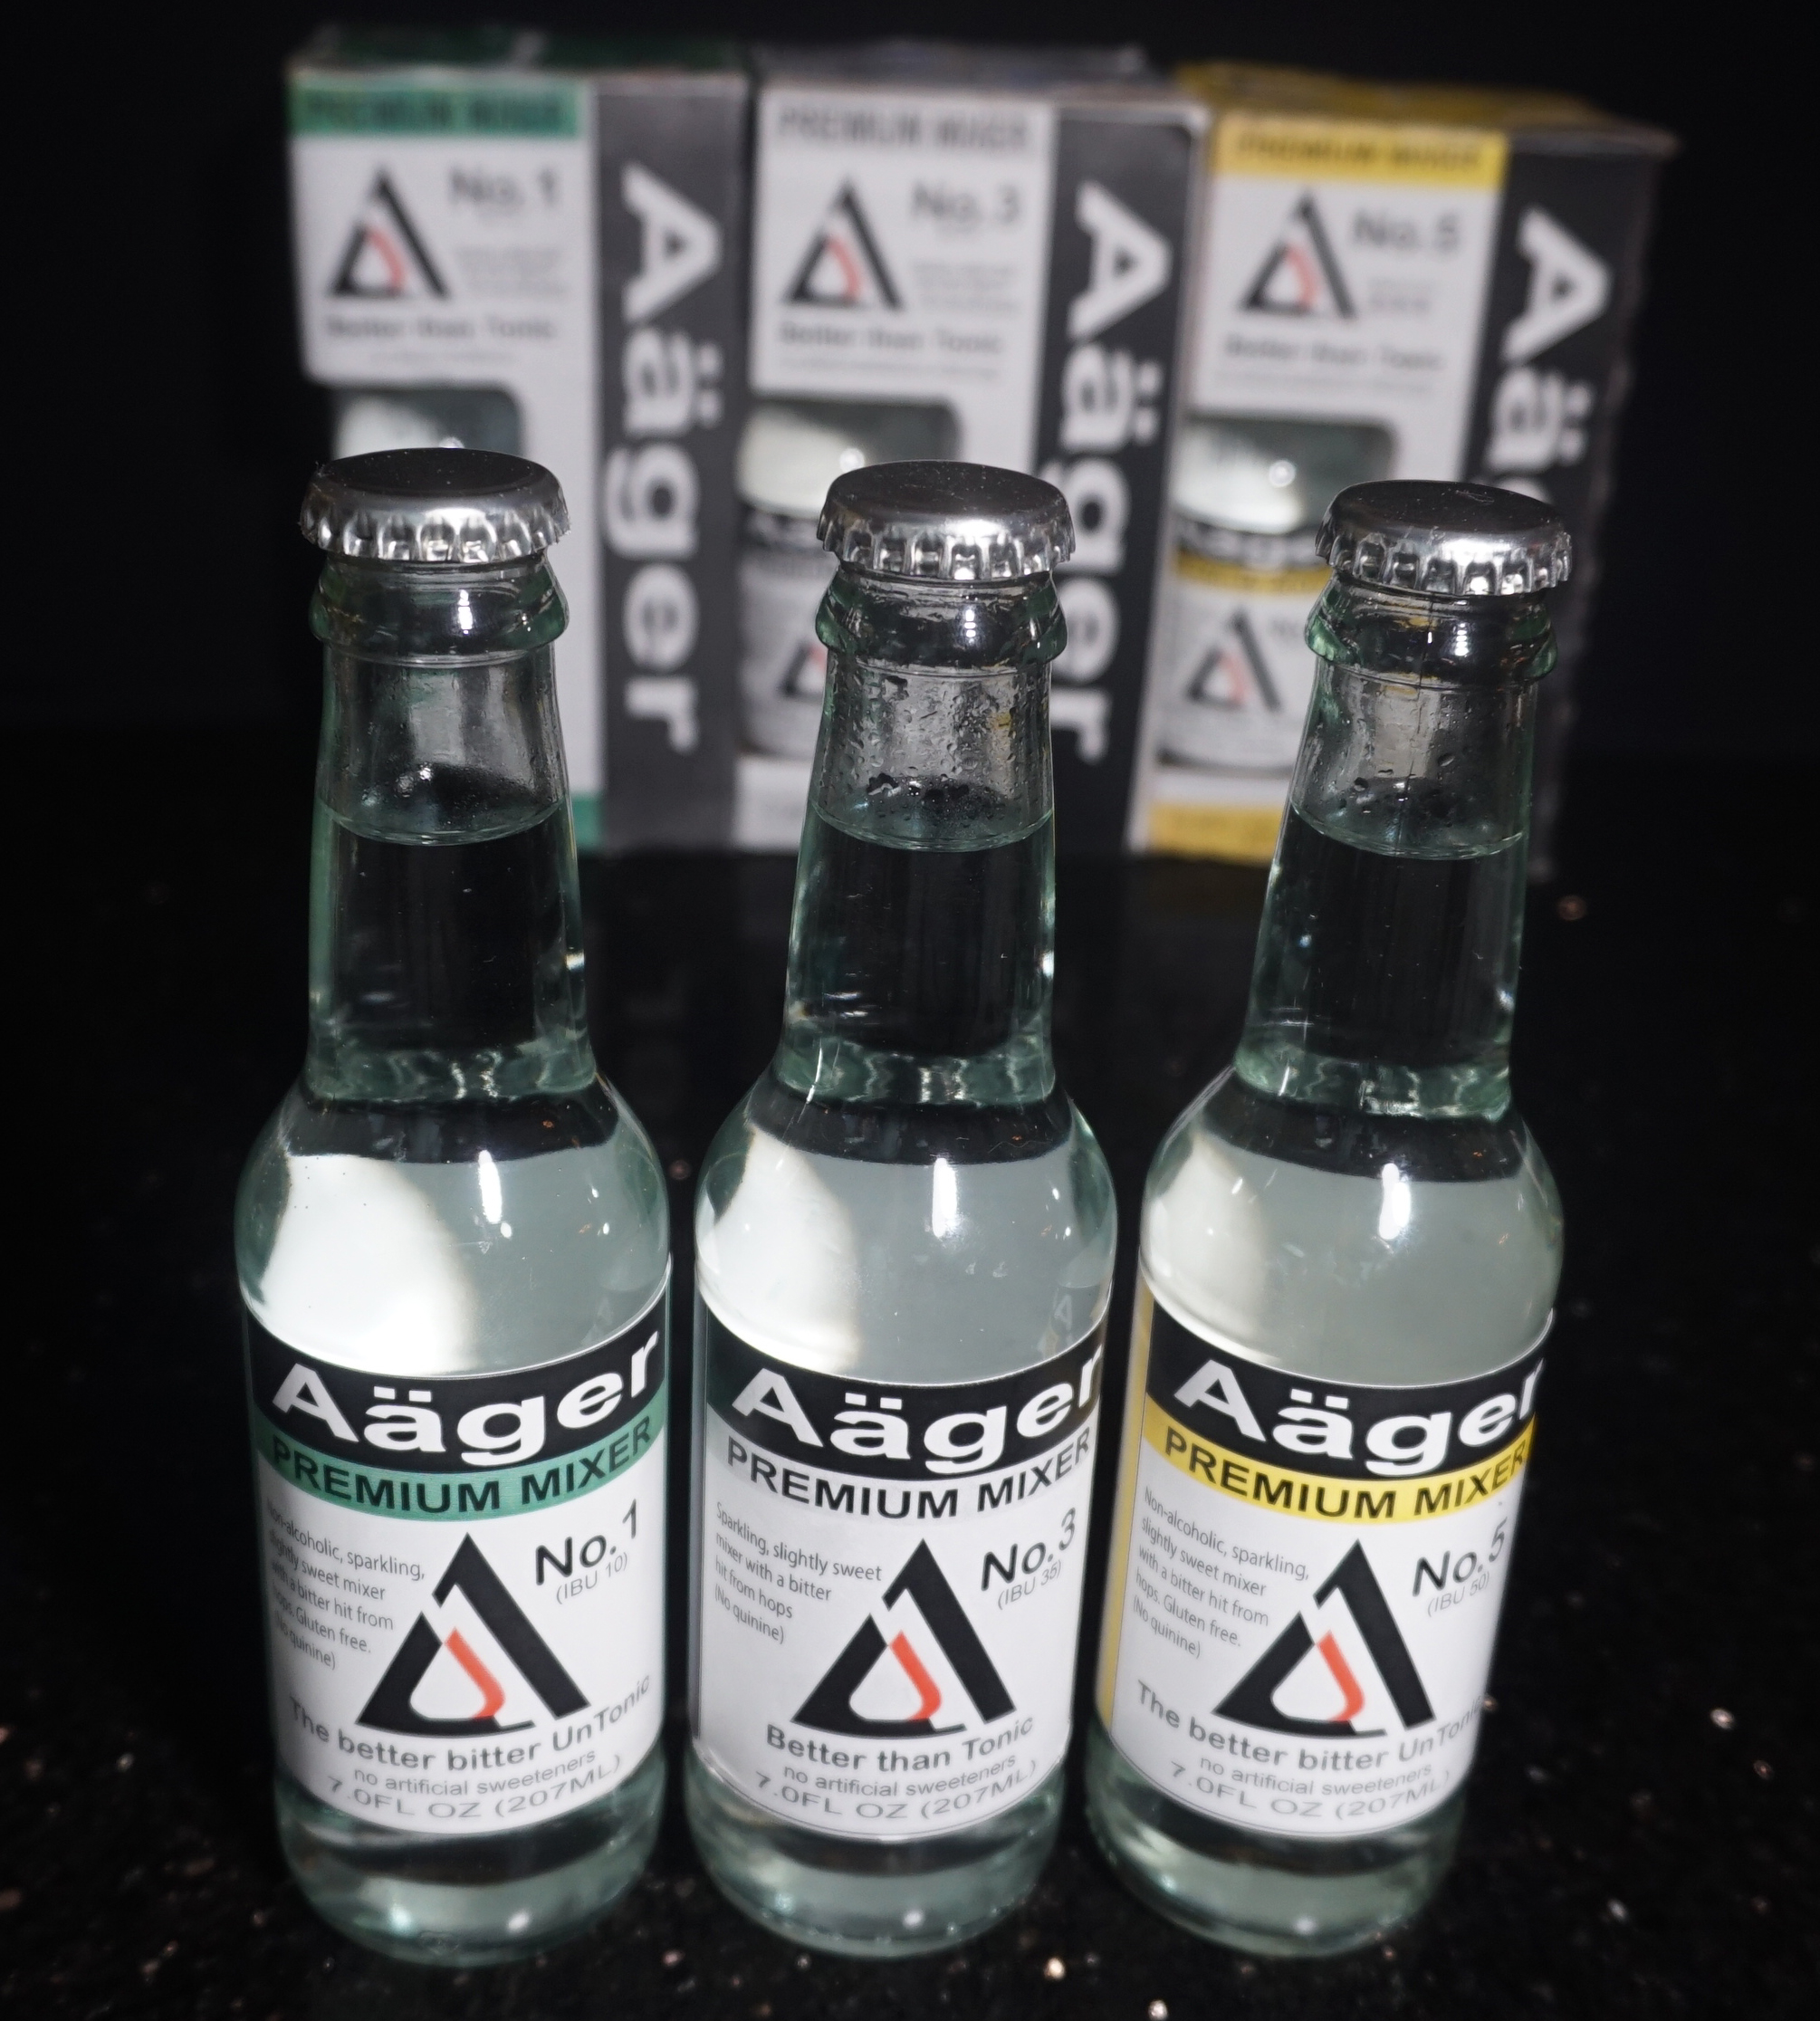 Aager Mixers - Better than Tonic.